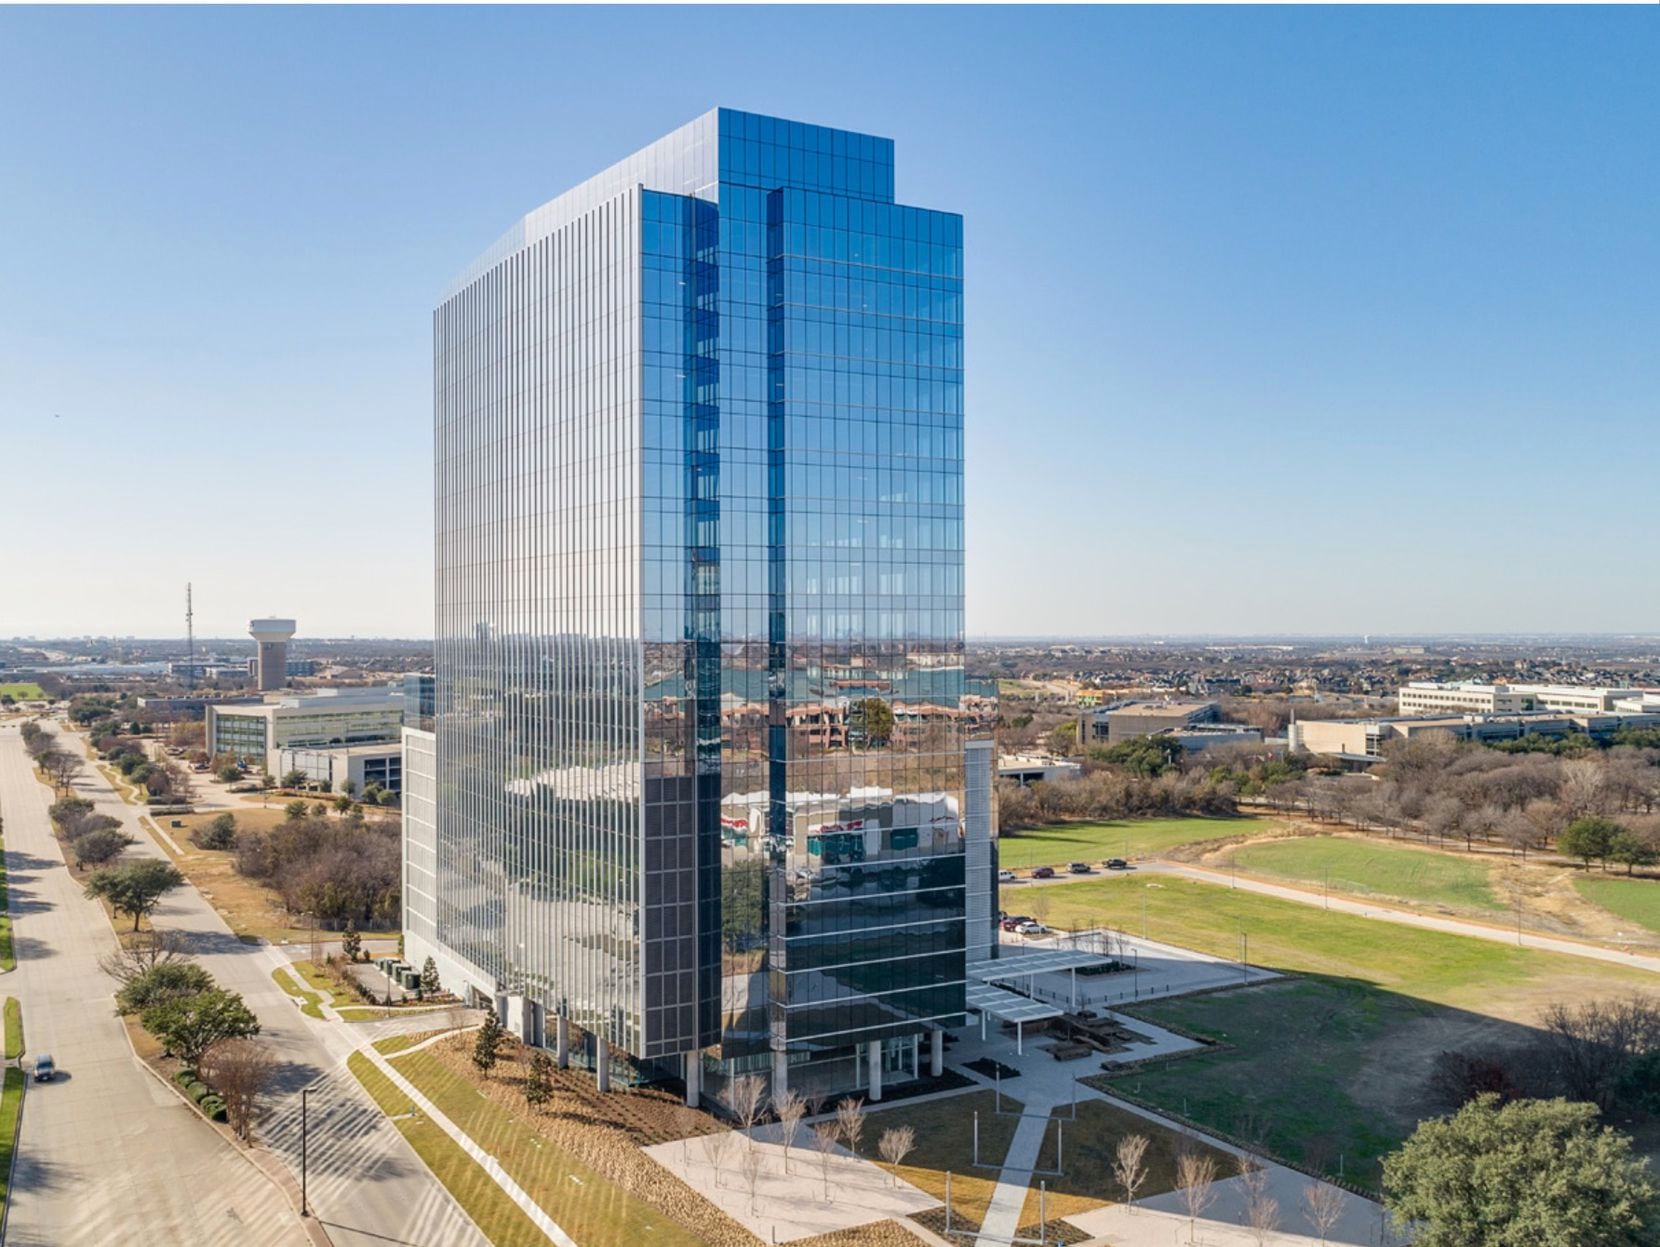 The new Plano office tower was built as the headquarters of Reata Pharmaceuticals but is now...